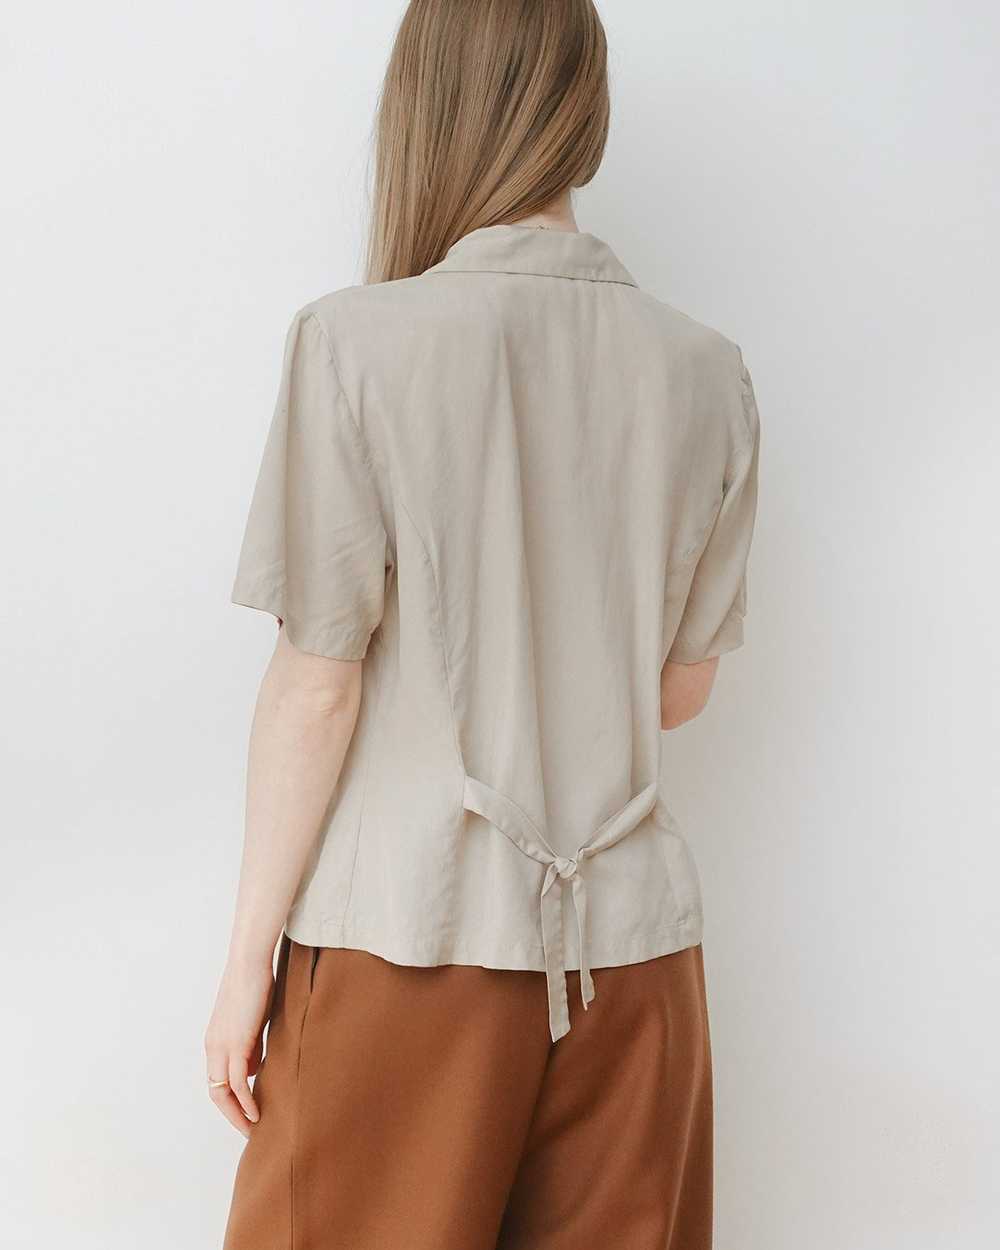 Beige Silk Button Up Blouse with Back Tie - image 2